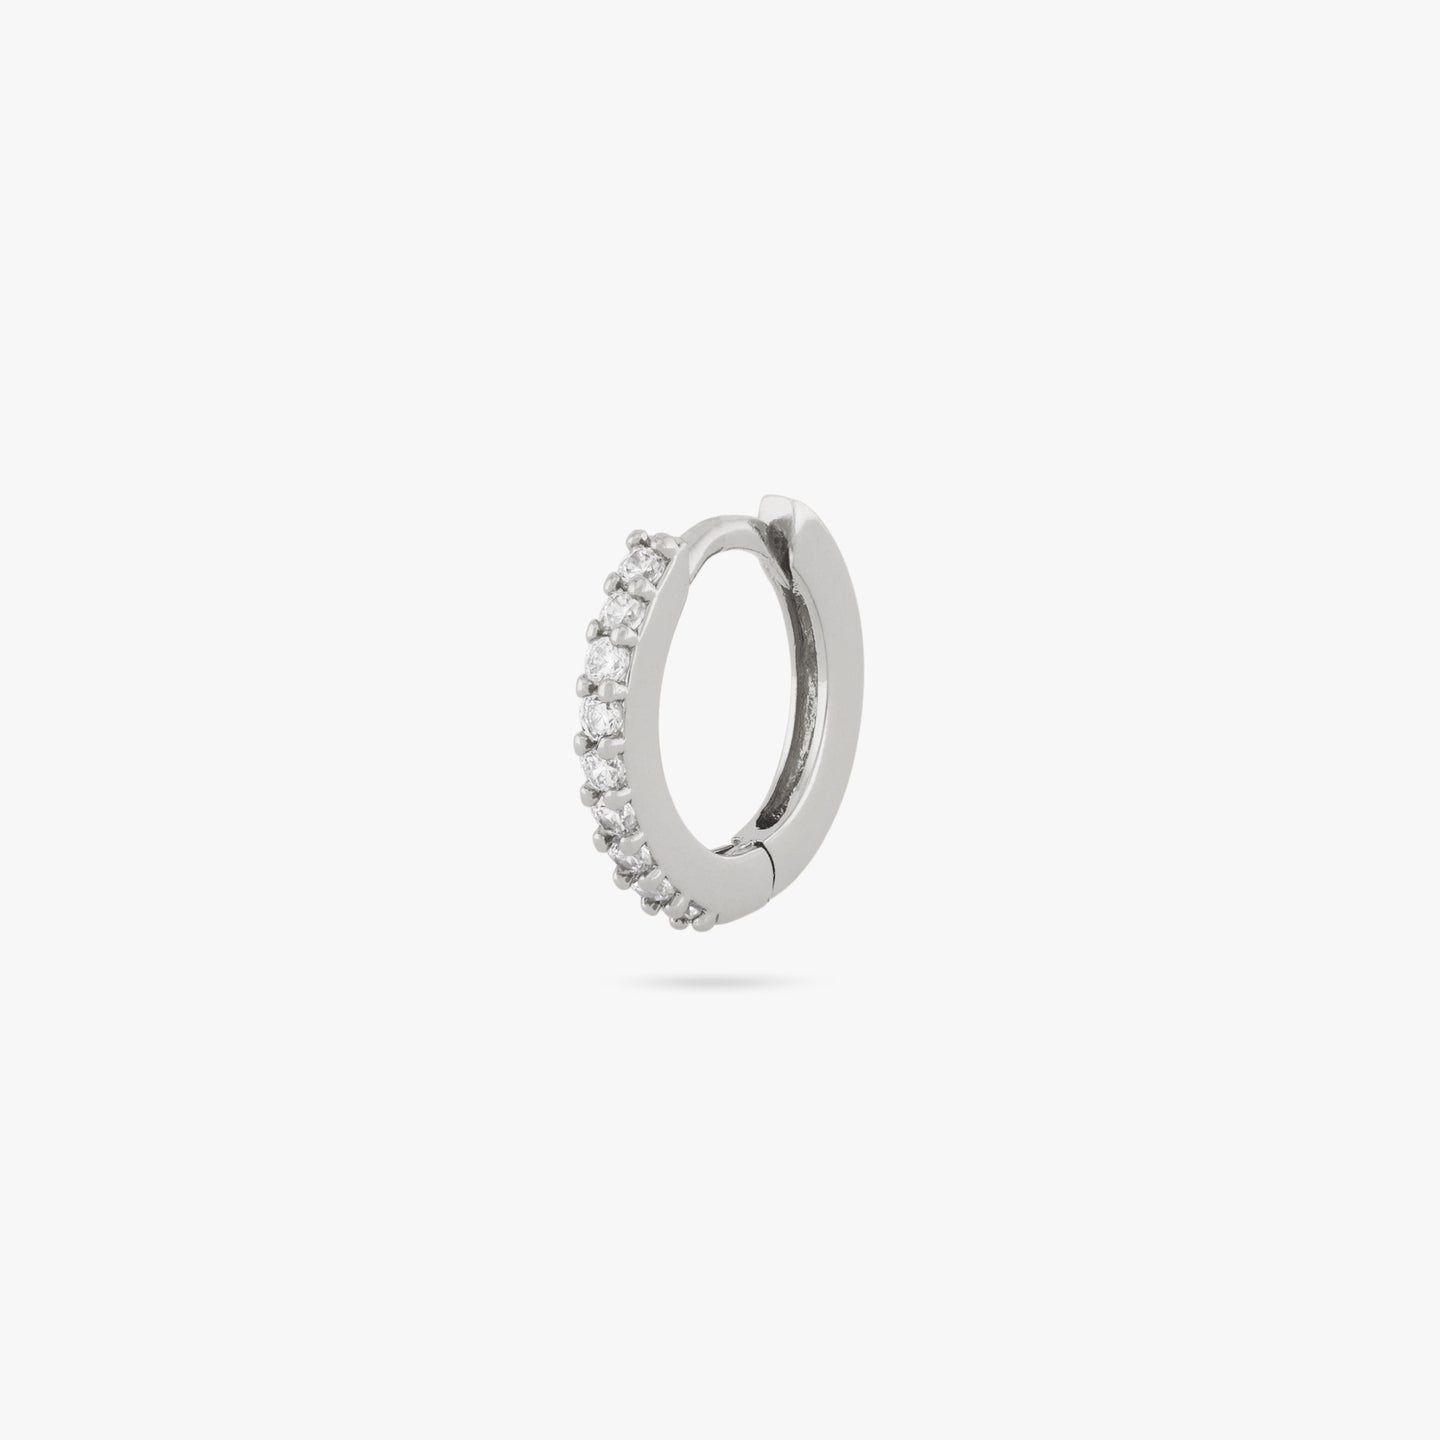 A mini silver huggie lined with clear cz gems on the front color:null|silver/clear